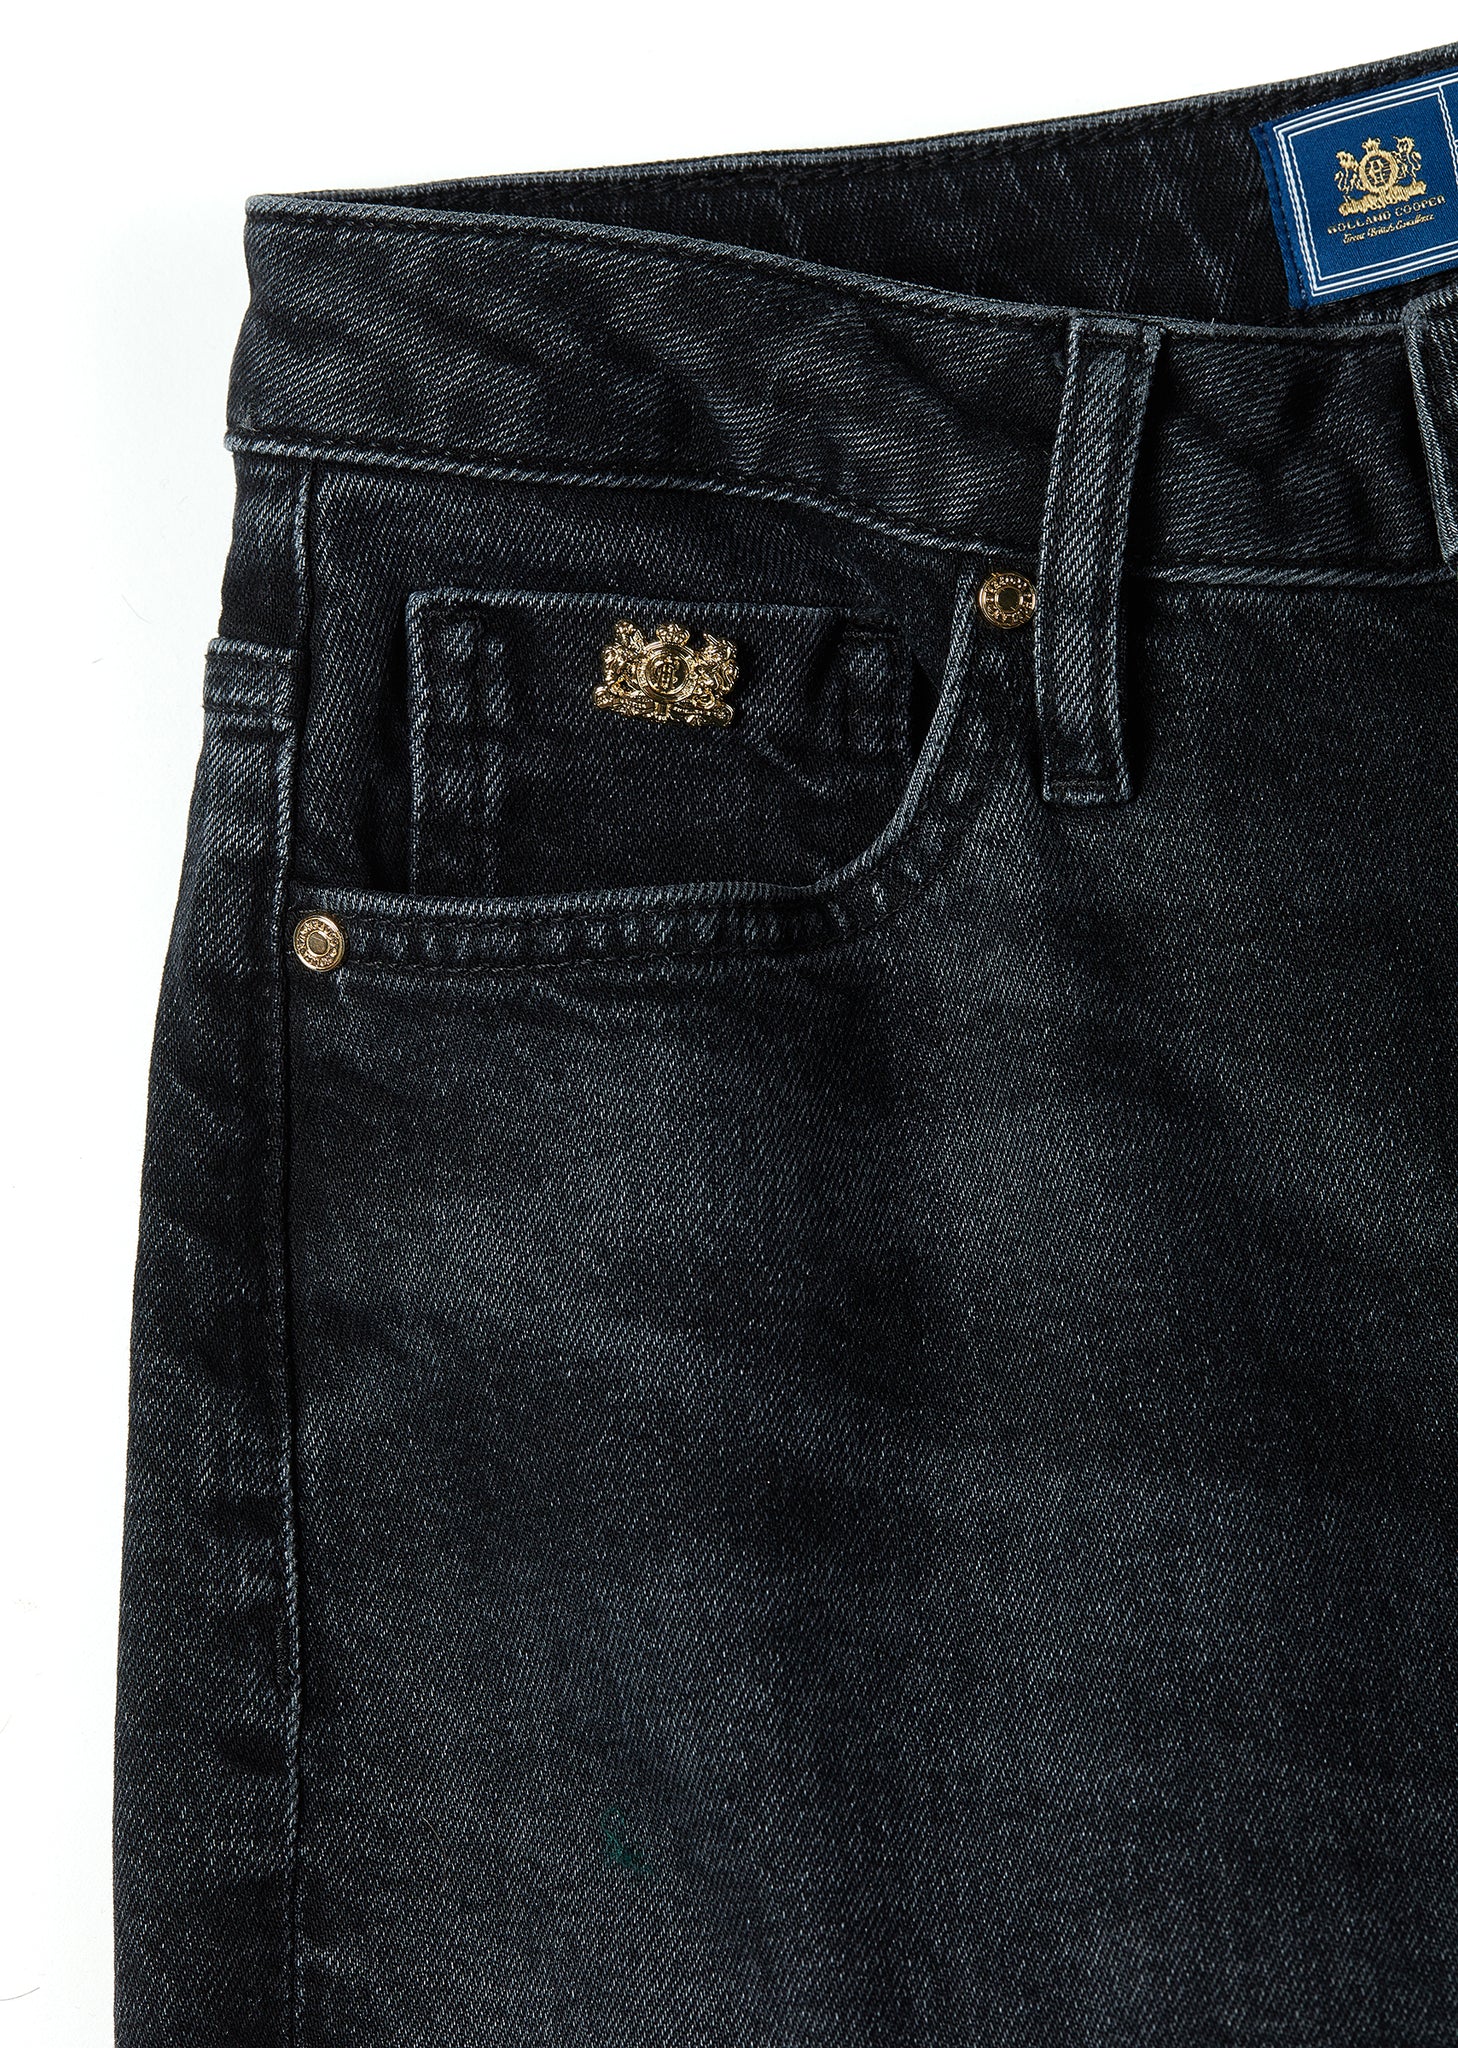 front pocket detail on womens high rise black denim slim fit jean with raw hem and two open pockets on the front and back with gold stirrup charm to the belt loop